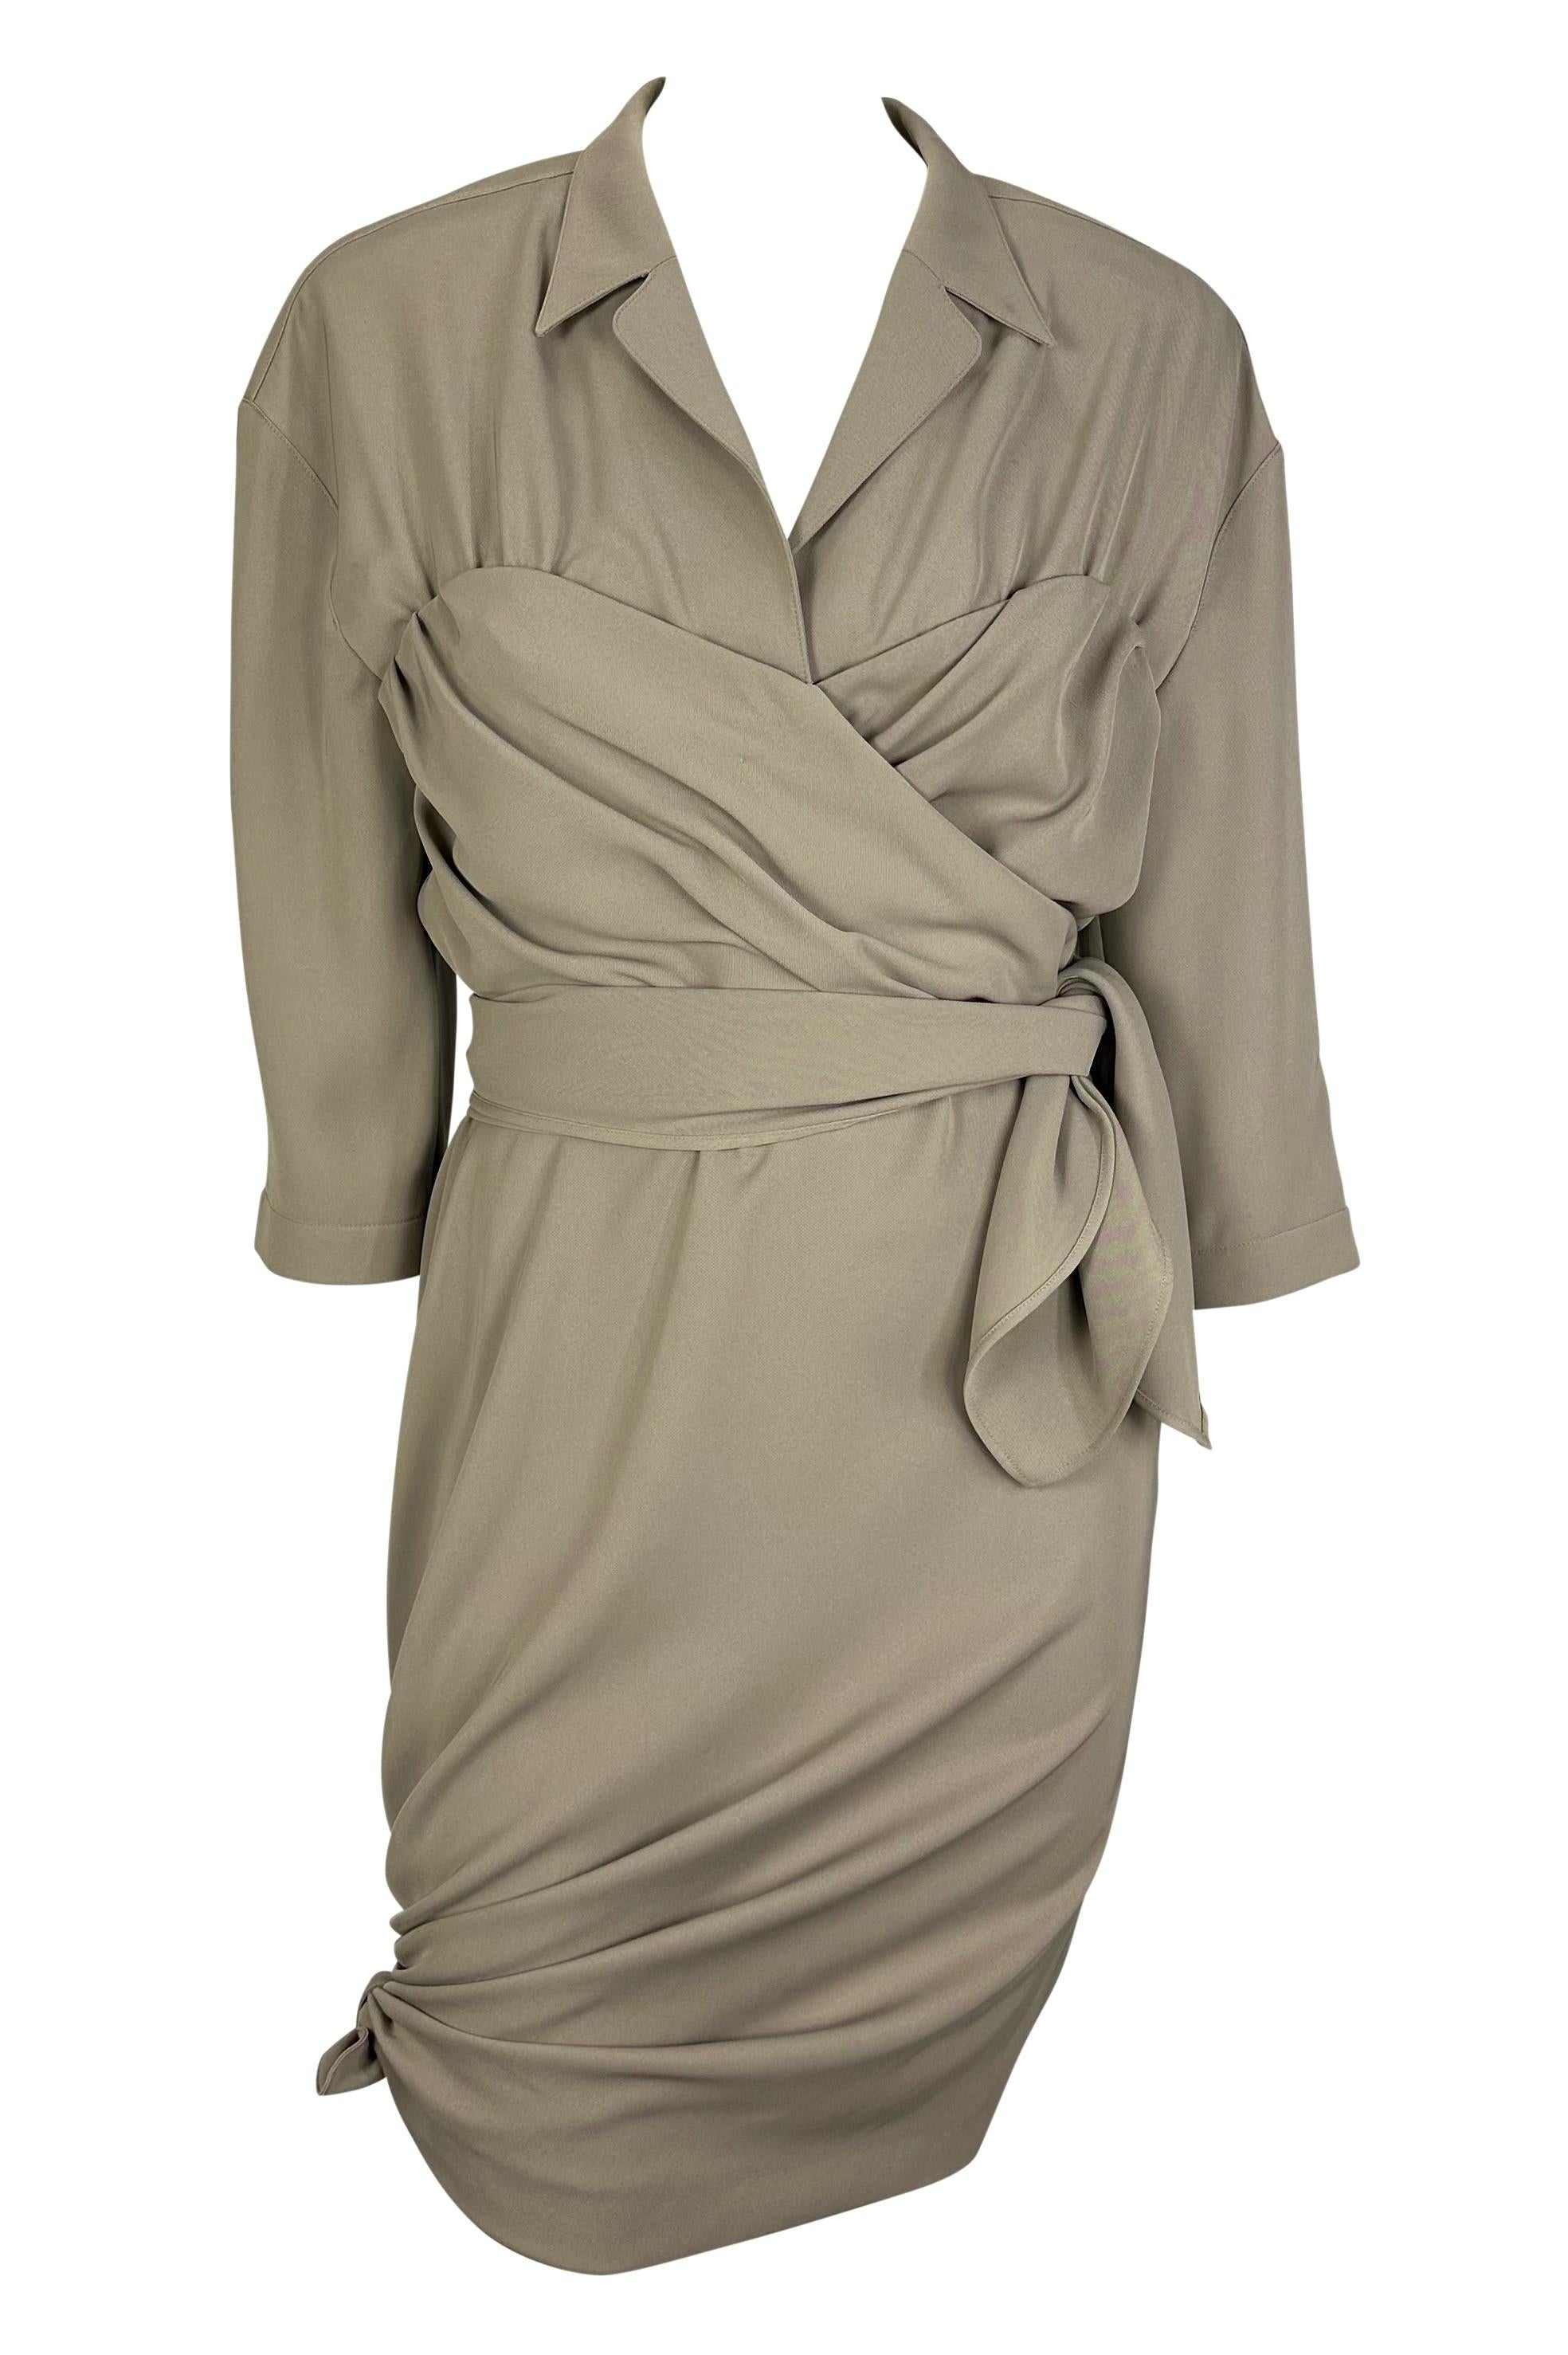 Presenting a beige Thierry Mugler collared tie dress designed by Manfred Mugler. From the 1980s, this fabulous dress features three-quarter-length sleeves, a plunging neckline, and ties around the waist and hem. This dress effortlessly highlights